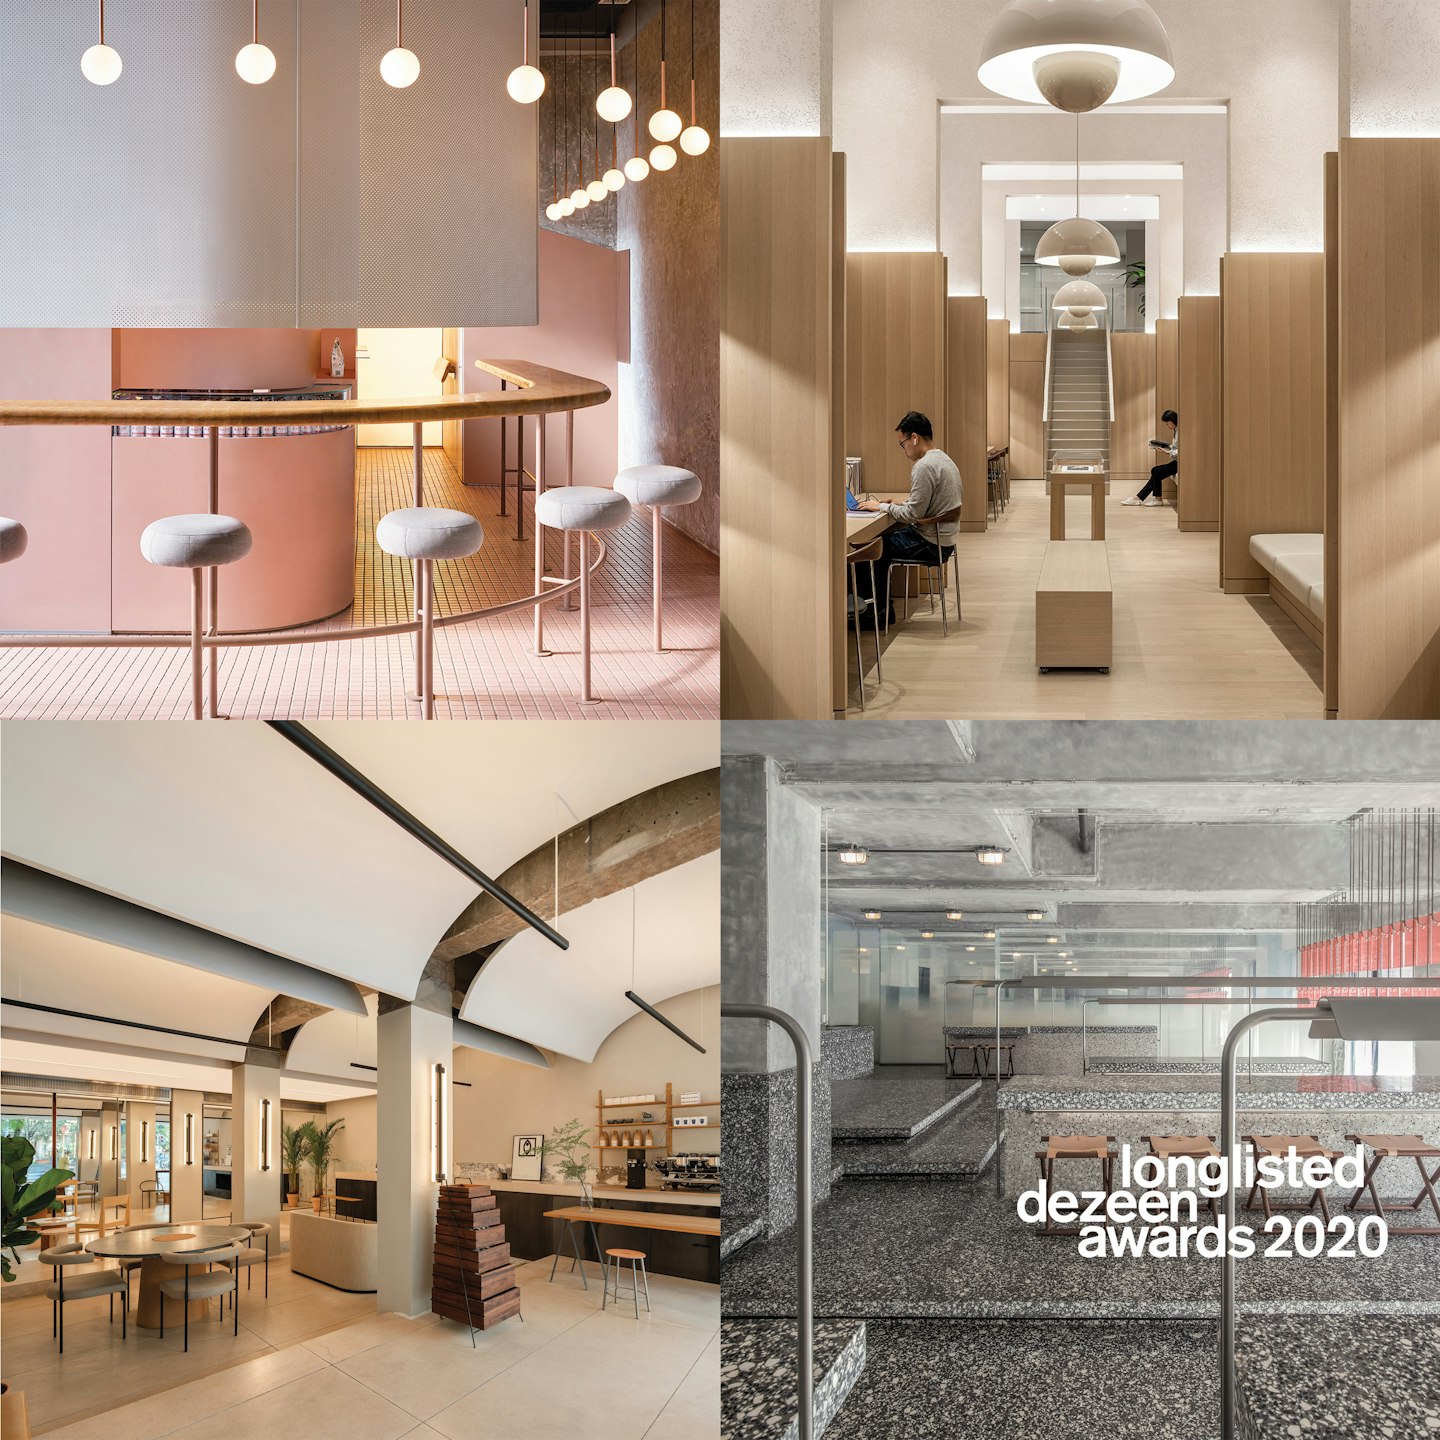 All four new projects are longlisted for Dezeen Awards 2020